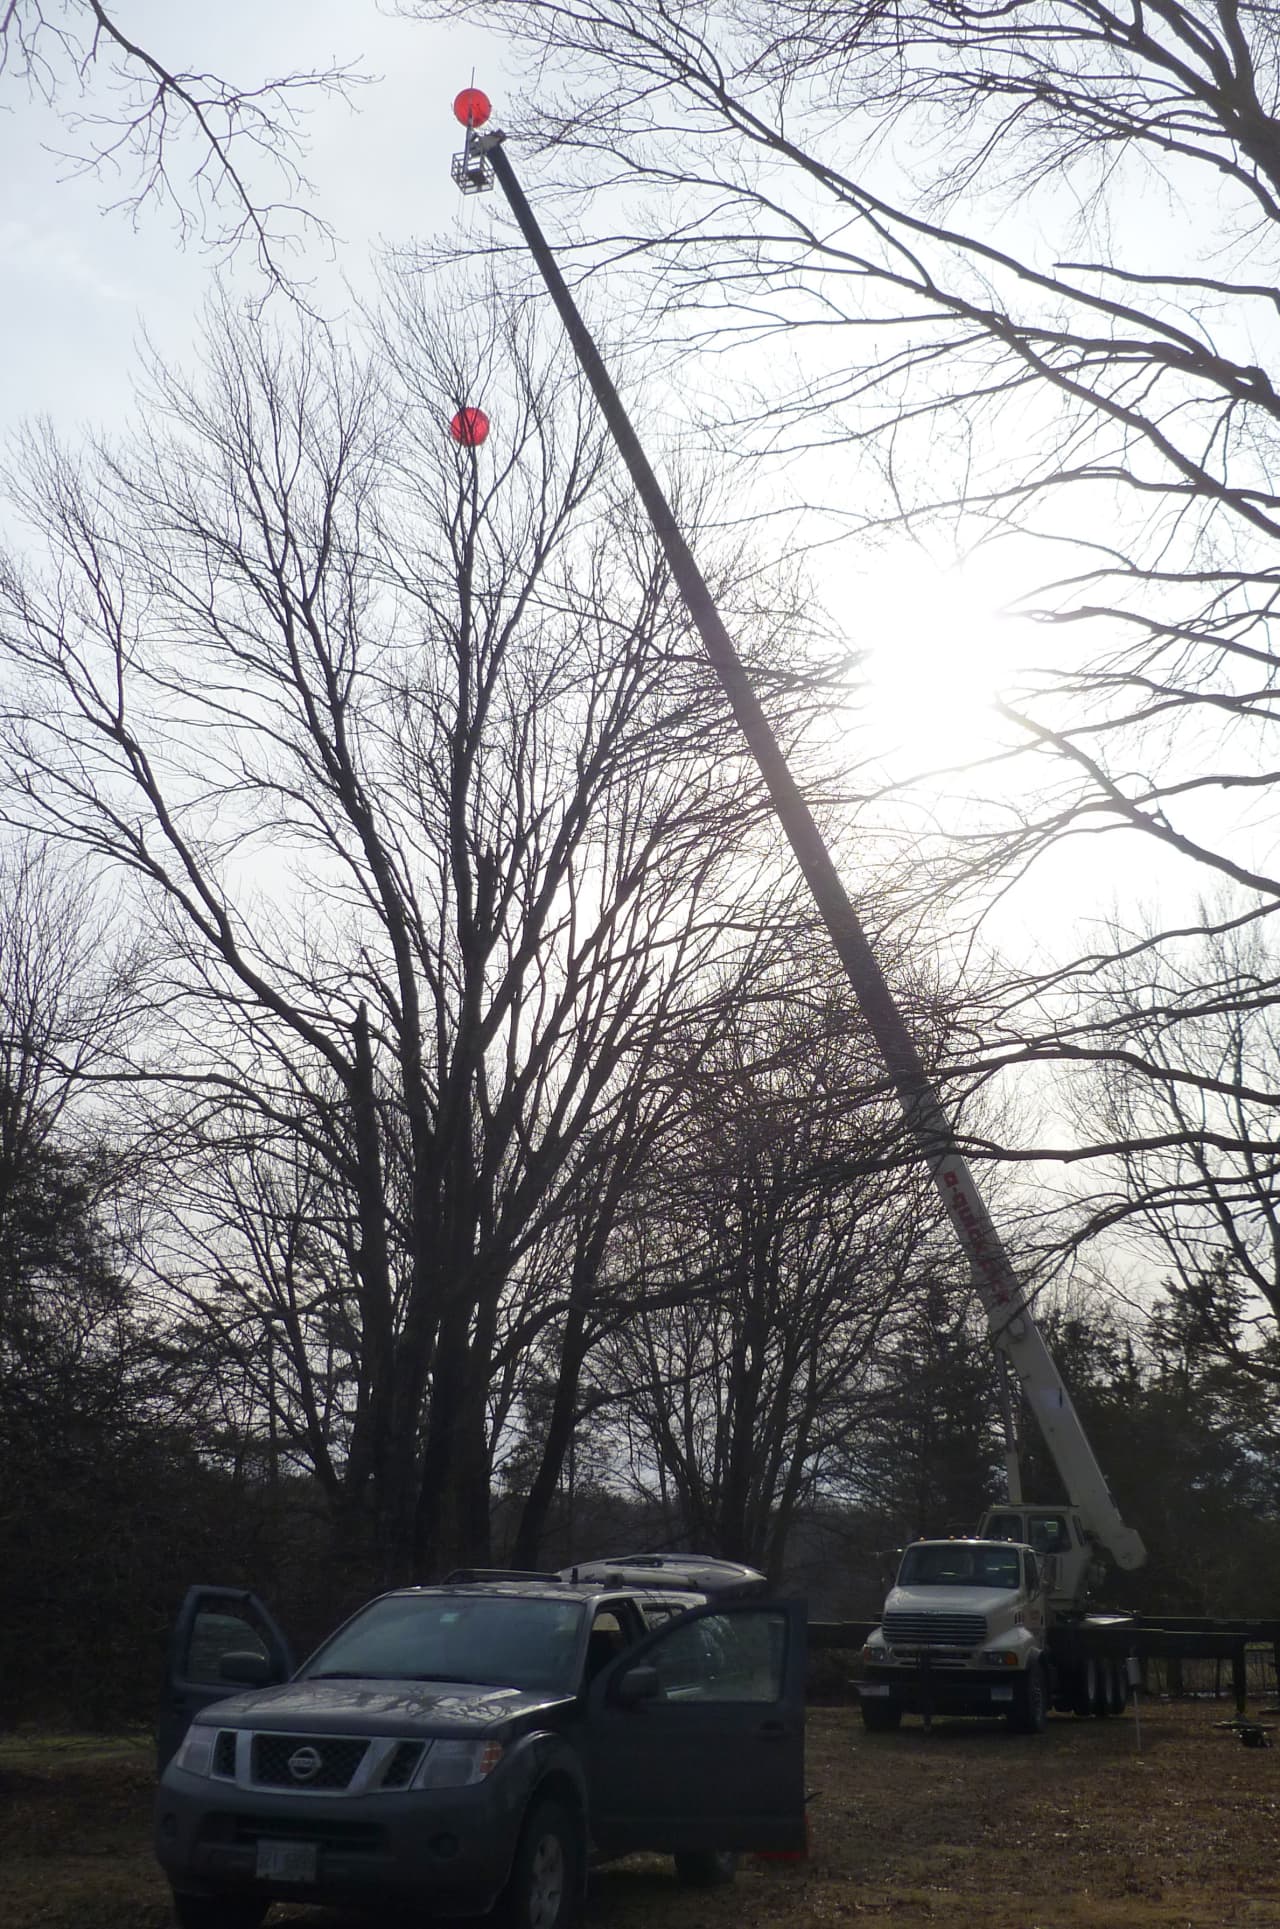 A test balloon will demonstrate the visibility of a cell tower in New Canaan on Saturday.